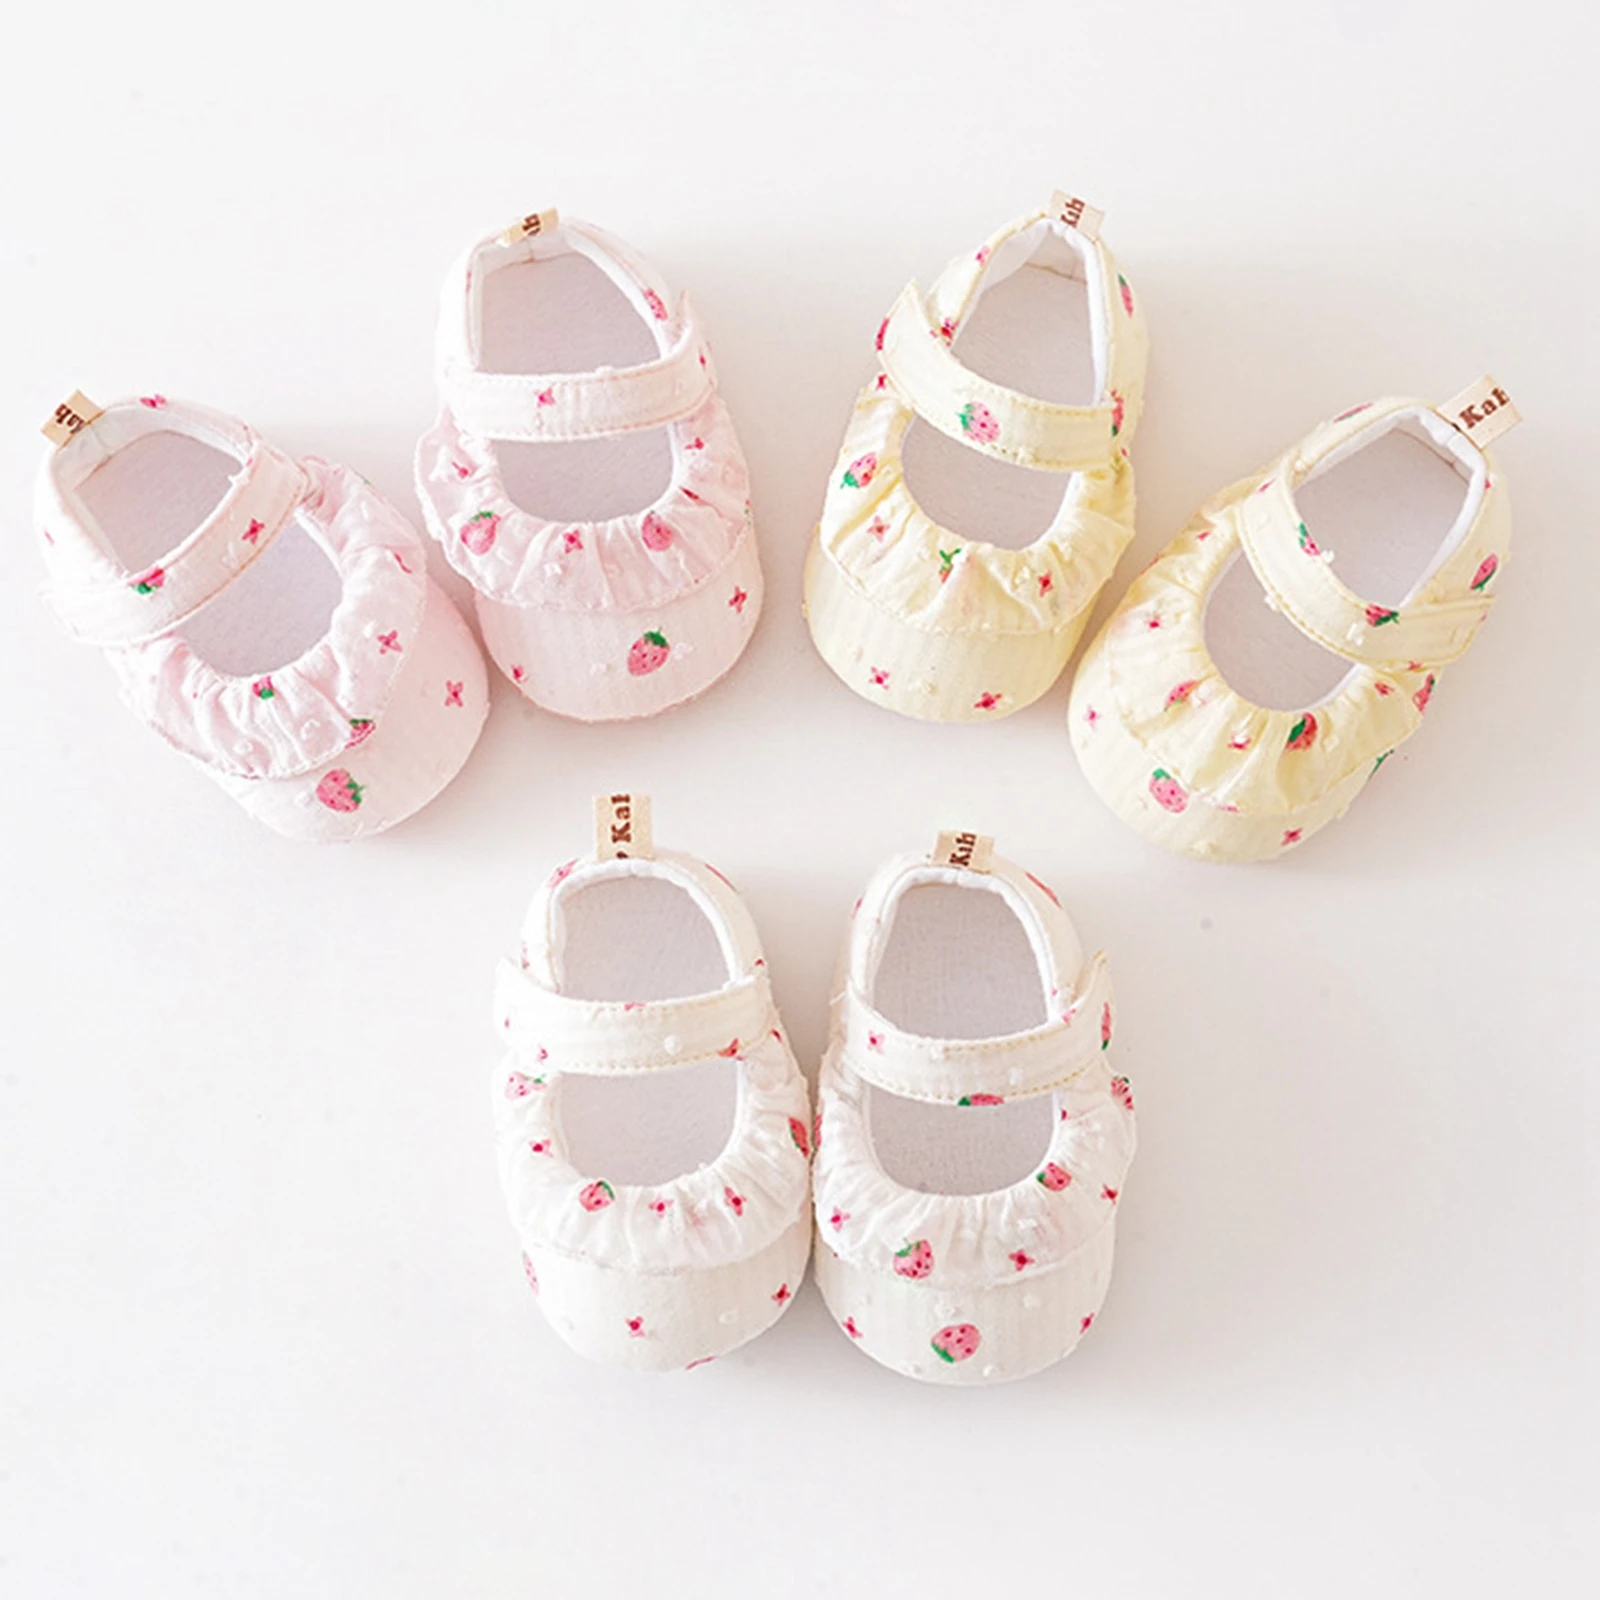 

Mildsown Baby Girls Mary Jane Flats Non-Slip Strawberry Print Ruffle Princess Dress Shoes Infant Crib Shoes Footwear